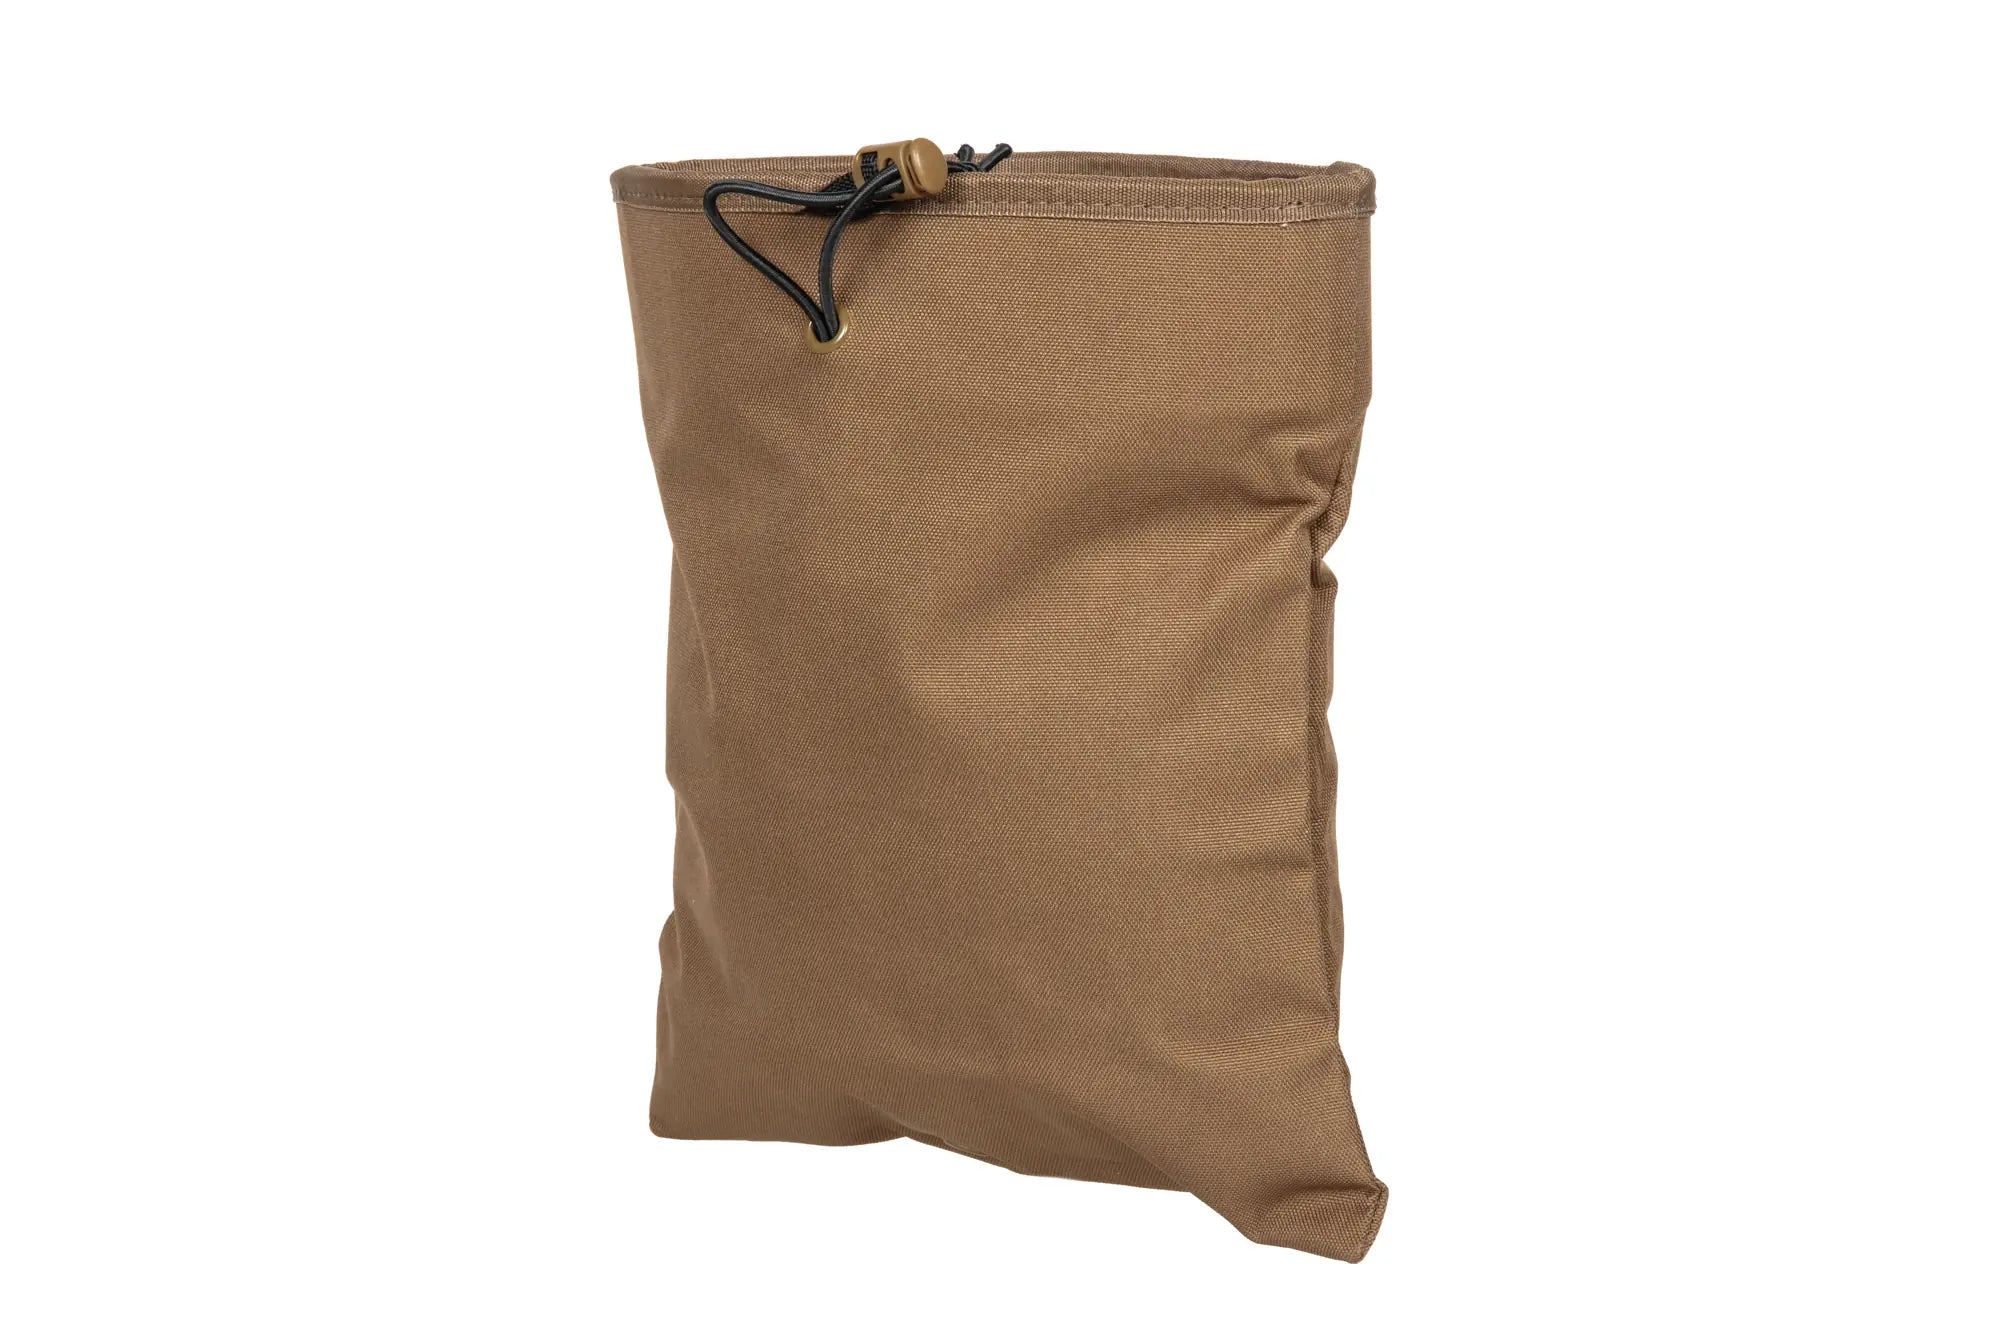 Dump Pouch for Magazines - Tan